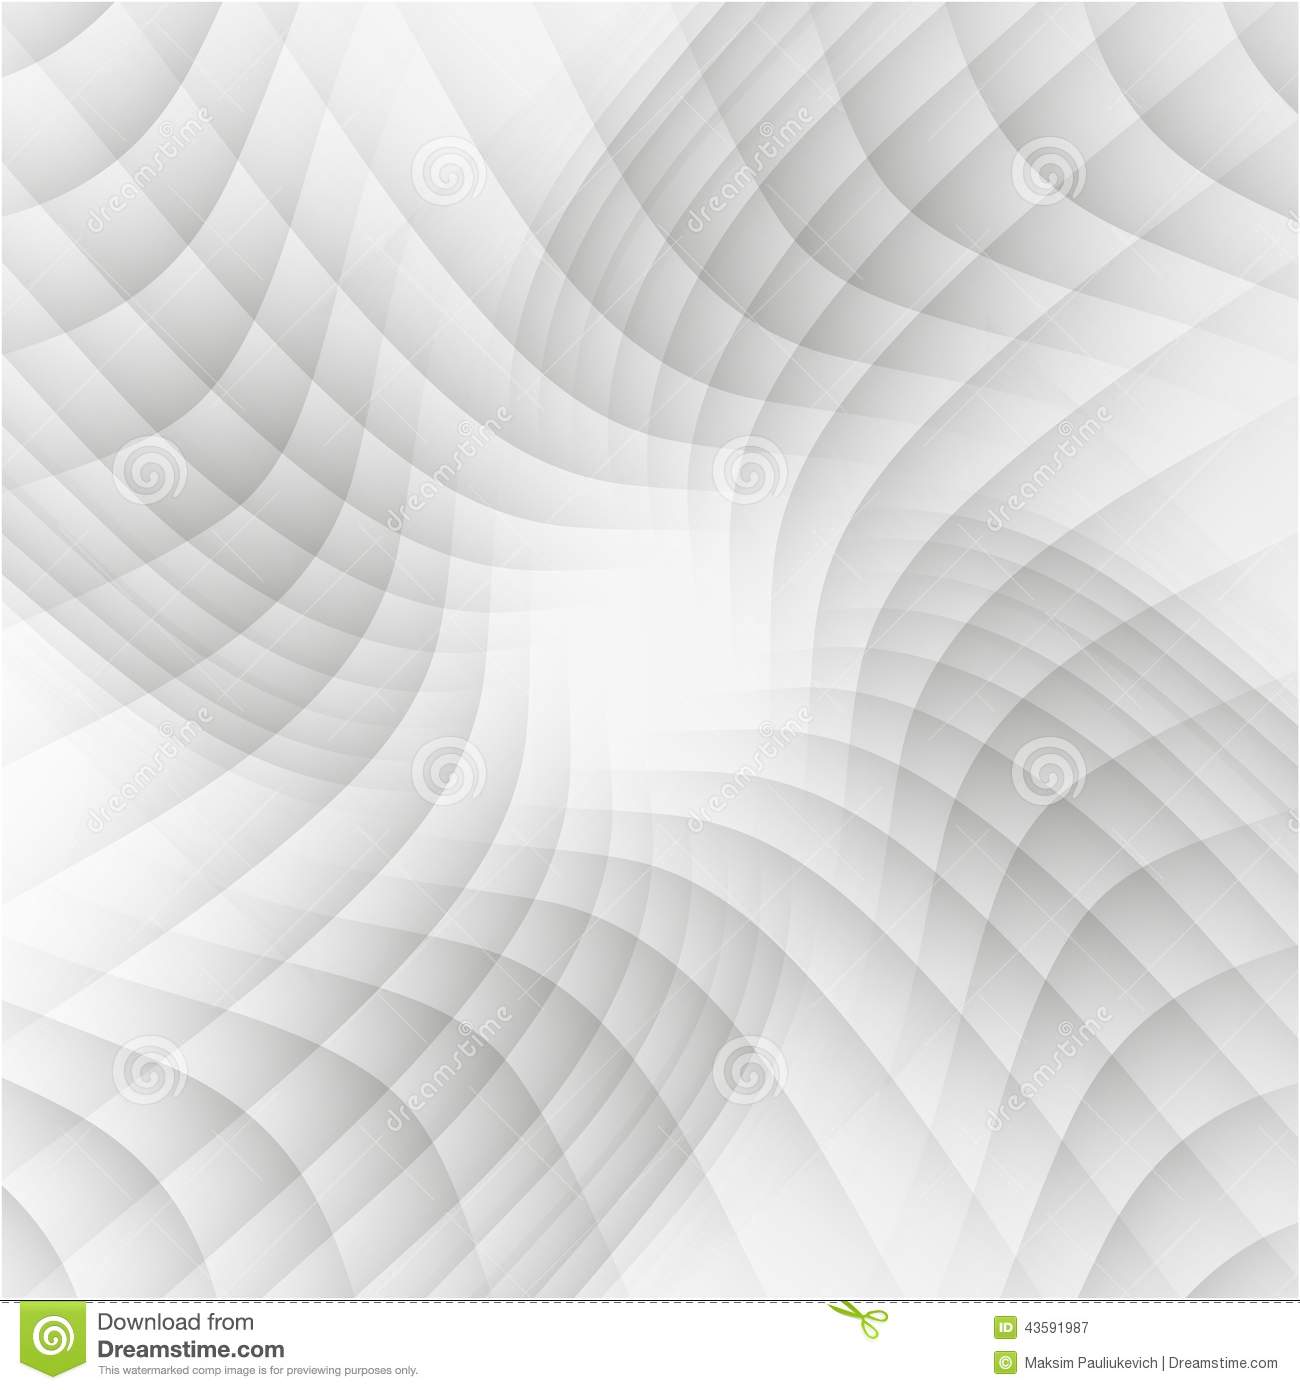 3D Abstract Vector Designs